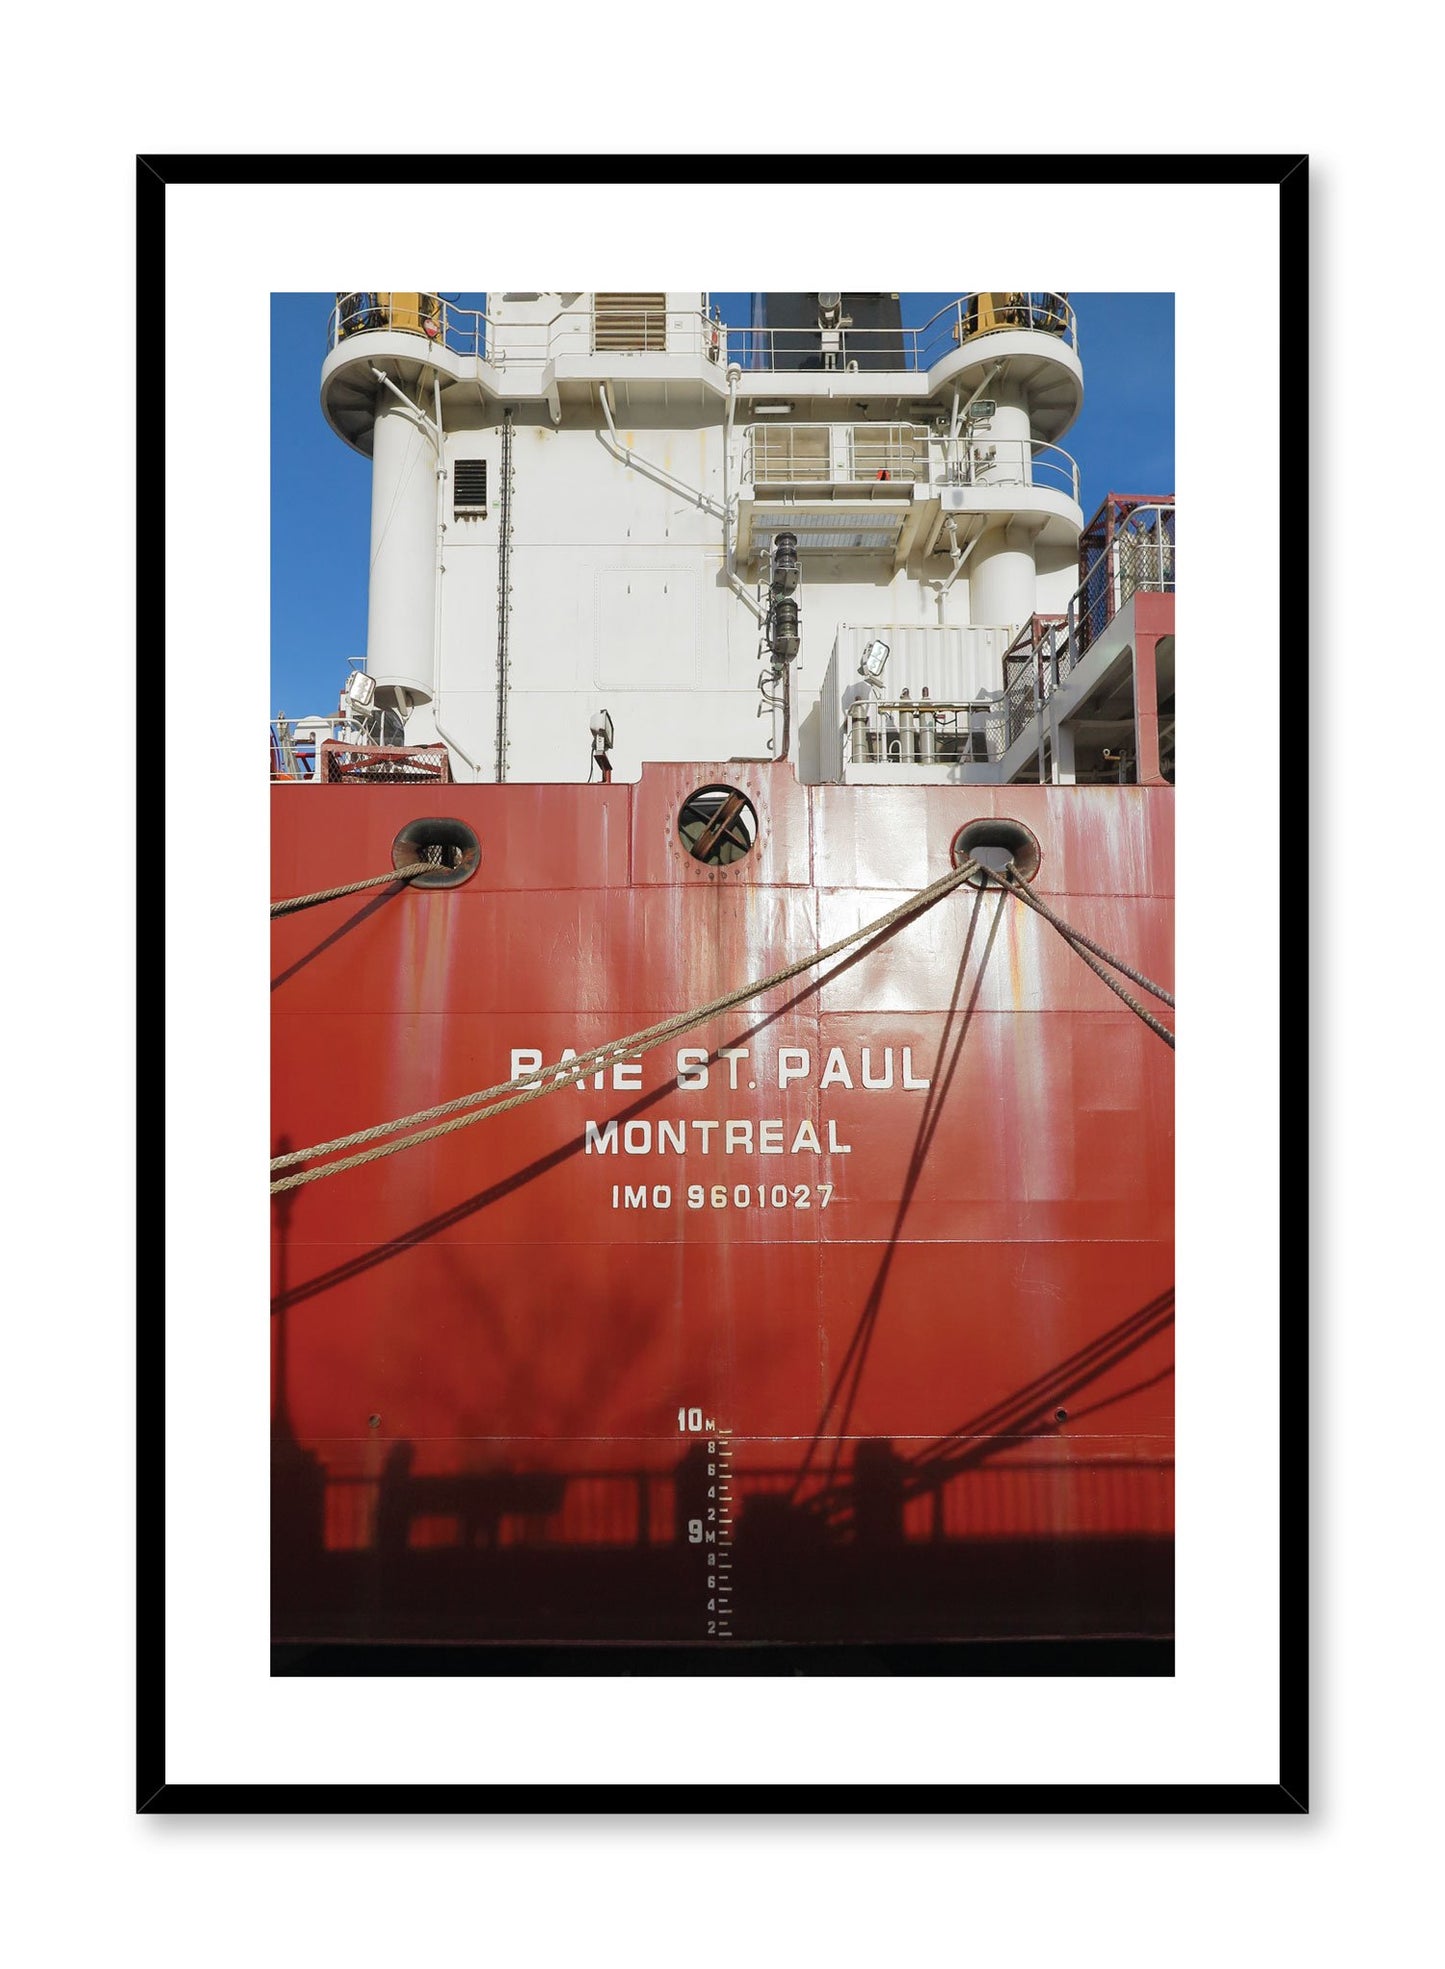 Minimalist design poster by Opposite Wall with urban photography of cargo ship